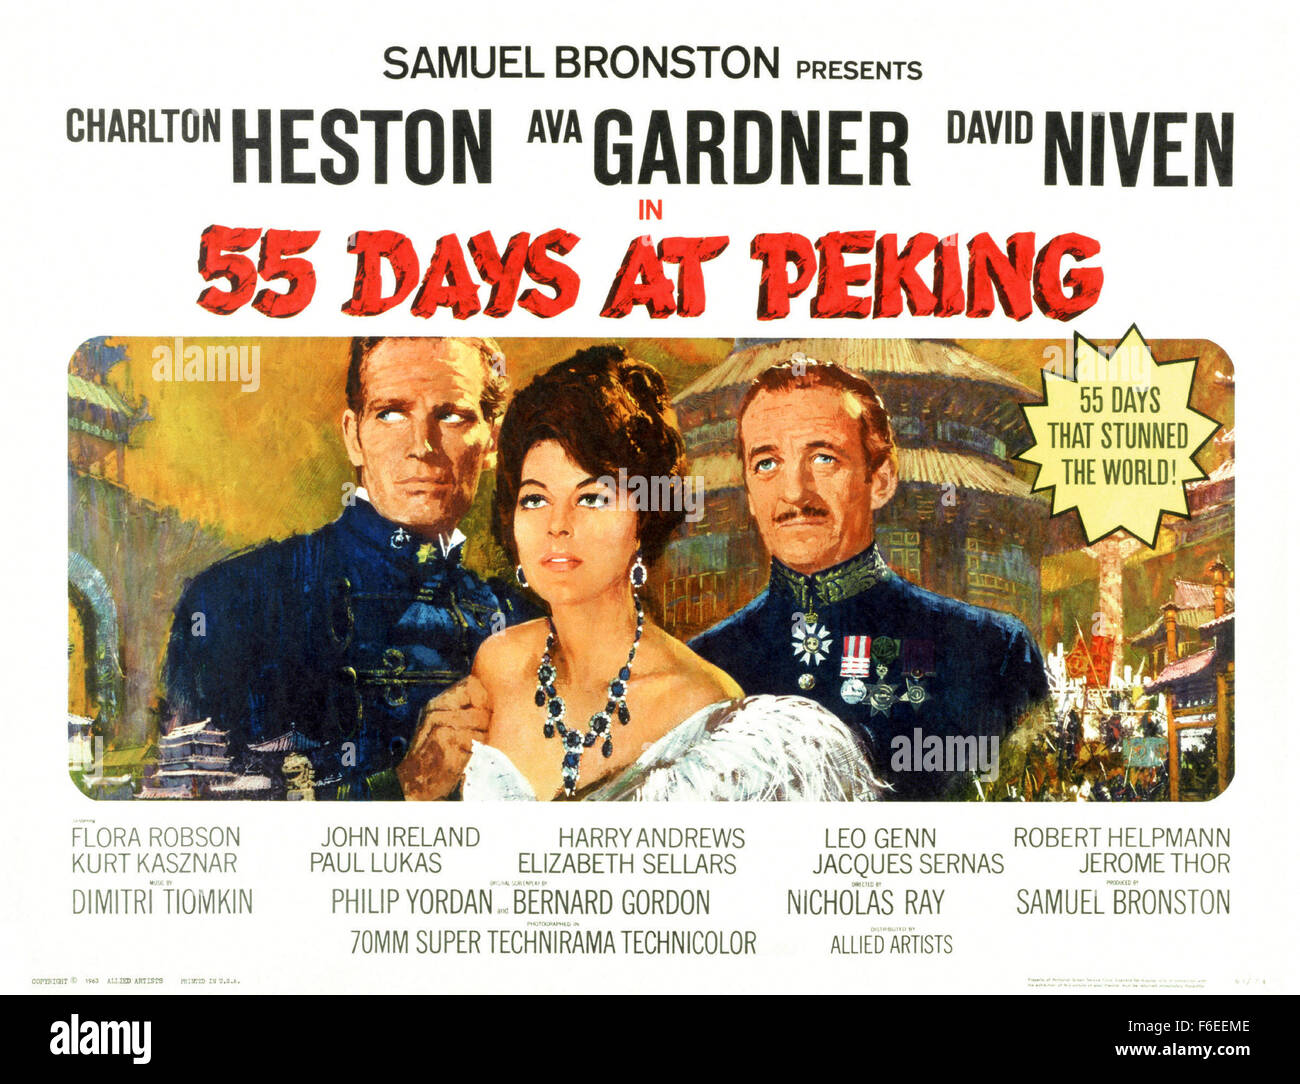 RELEASED DATE: May 29, 1963. MOVIE TITLE: 55 Days at Peking. STUDIO: Samuel Bronston Productions. PLOT: Diplomats, soldiers and other representatives of a dozen nations fend off the siege of the International Compound in Peking during the 1900 Boxer Rebellion. The disparate interests unite for survival despite competing factions, overwhelming odds, delayed relief and tacit support of the Boxers by the Empress of China and her generals. PICTURED: CHARLTON HESTON as Maj. Matt Lewis, AVA GARDNER as Baroness Natalie Ivanoff and DAVID NIVEN as Sir Arthur Robertson; Movie Card. Stock Photo